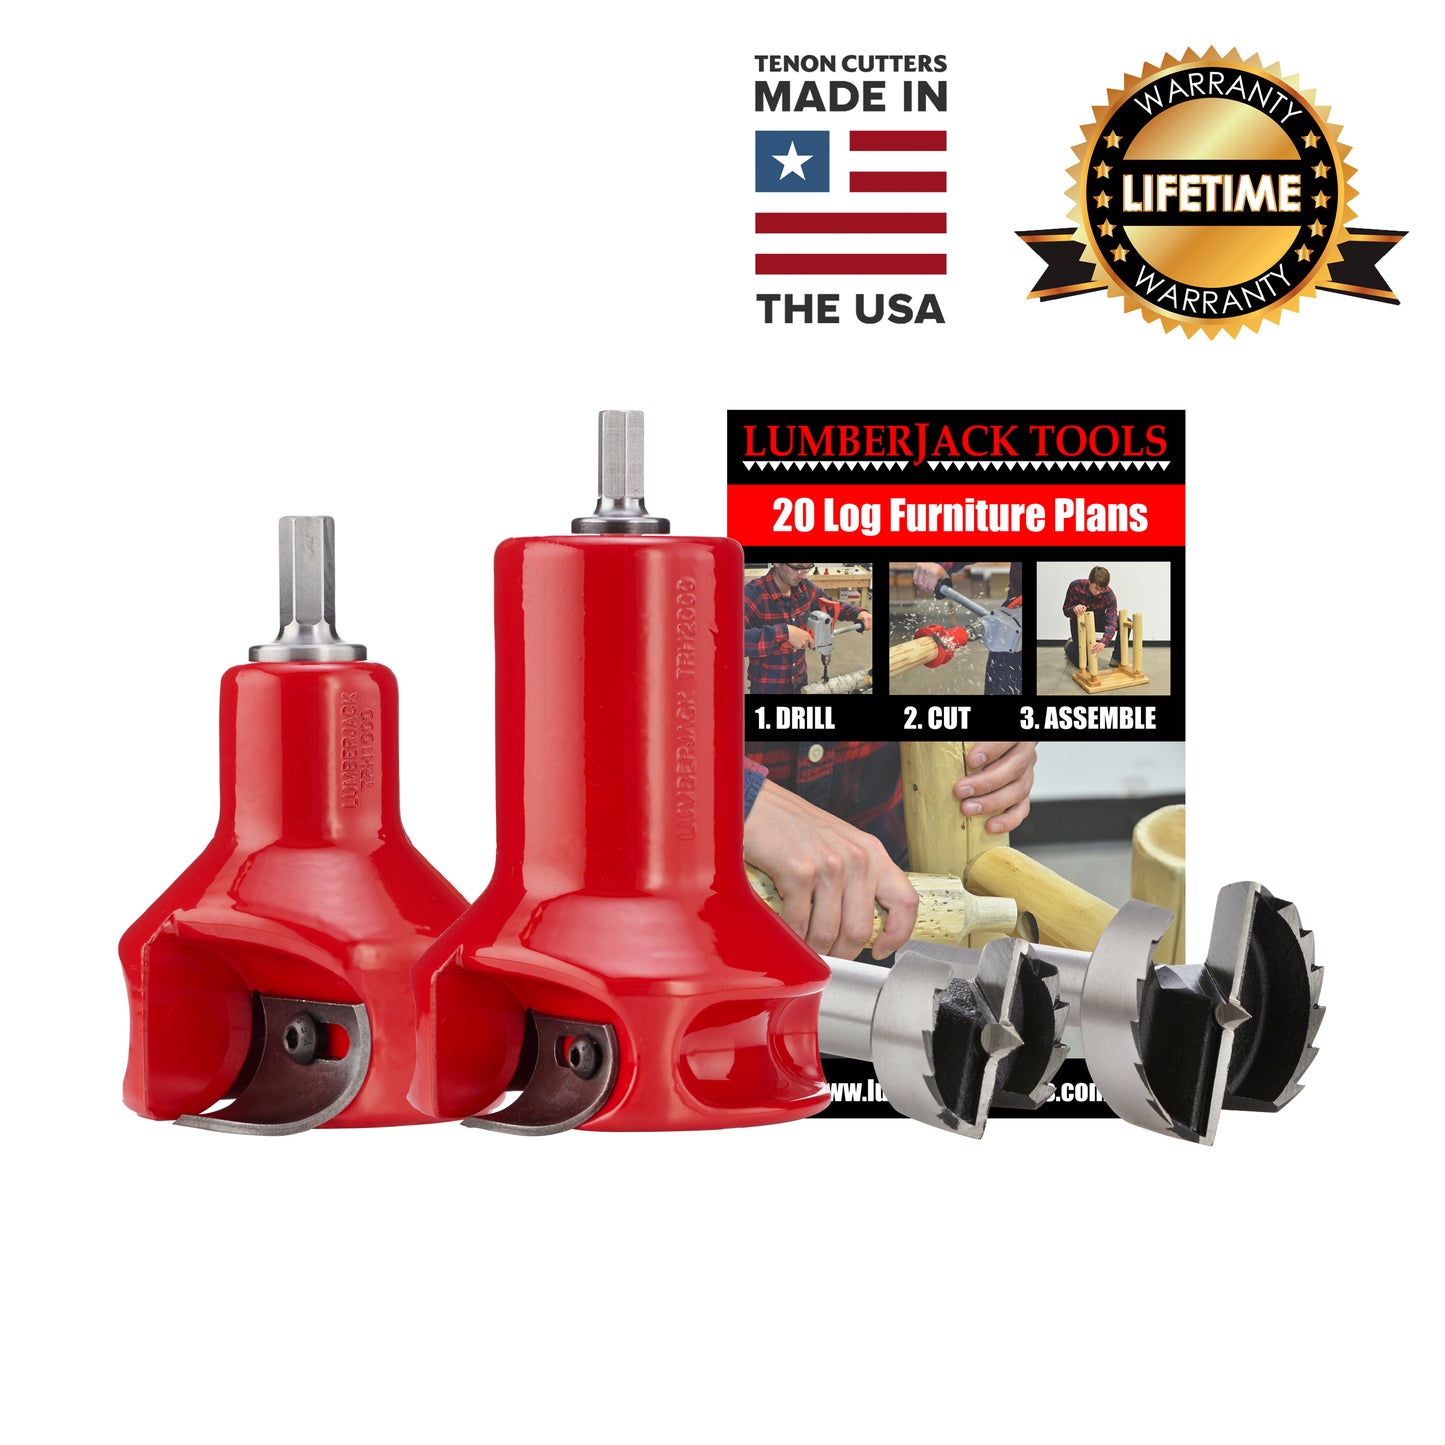 Home Series Starter Kit - USA Made Tenon Cutters